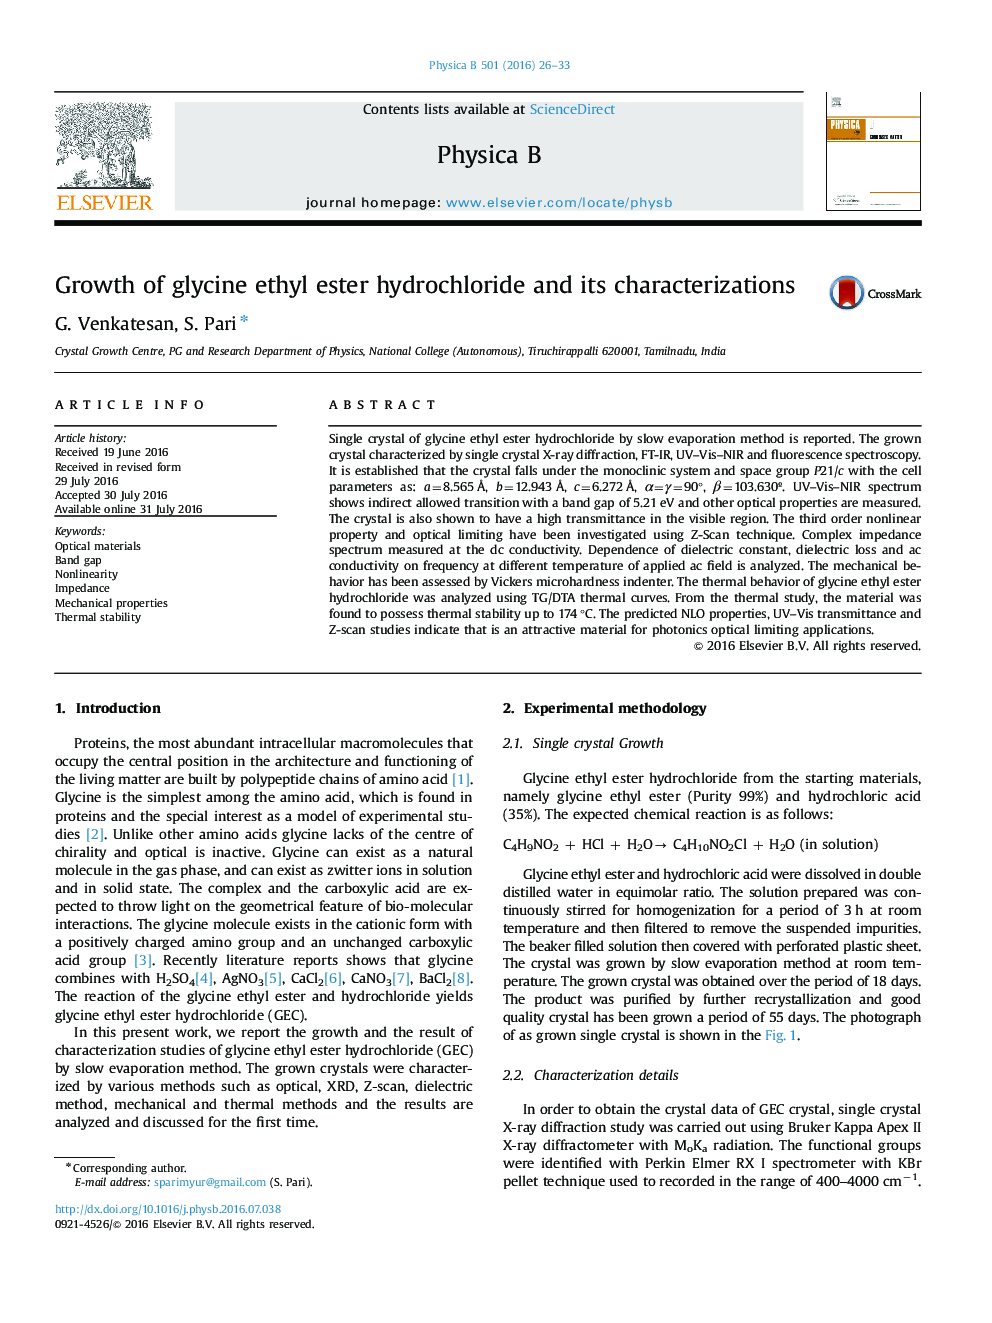 Growth of glycine ethyl ester hydrochloride and its characterizations